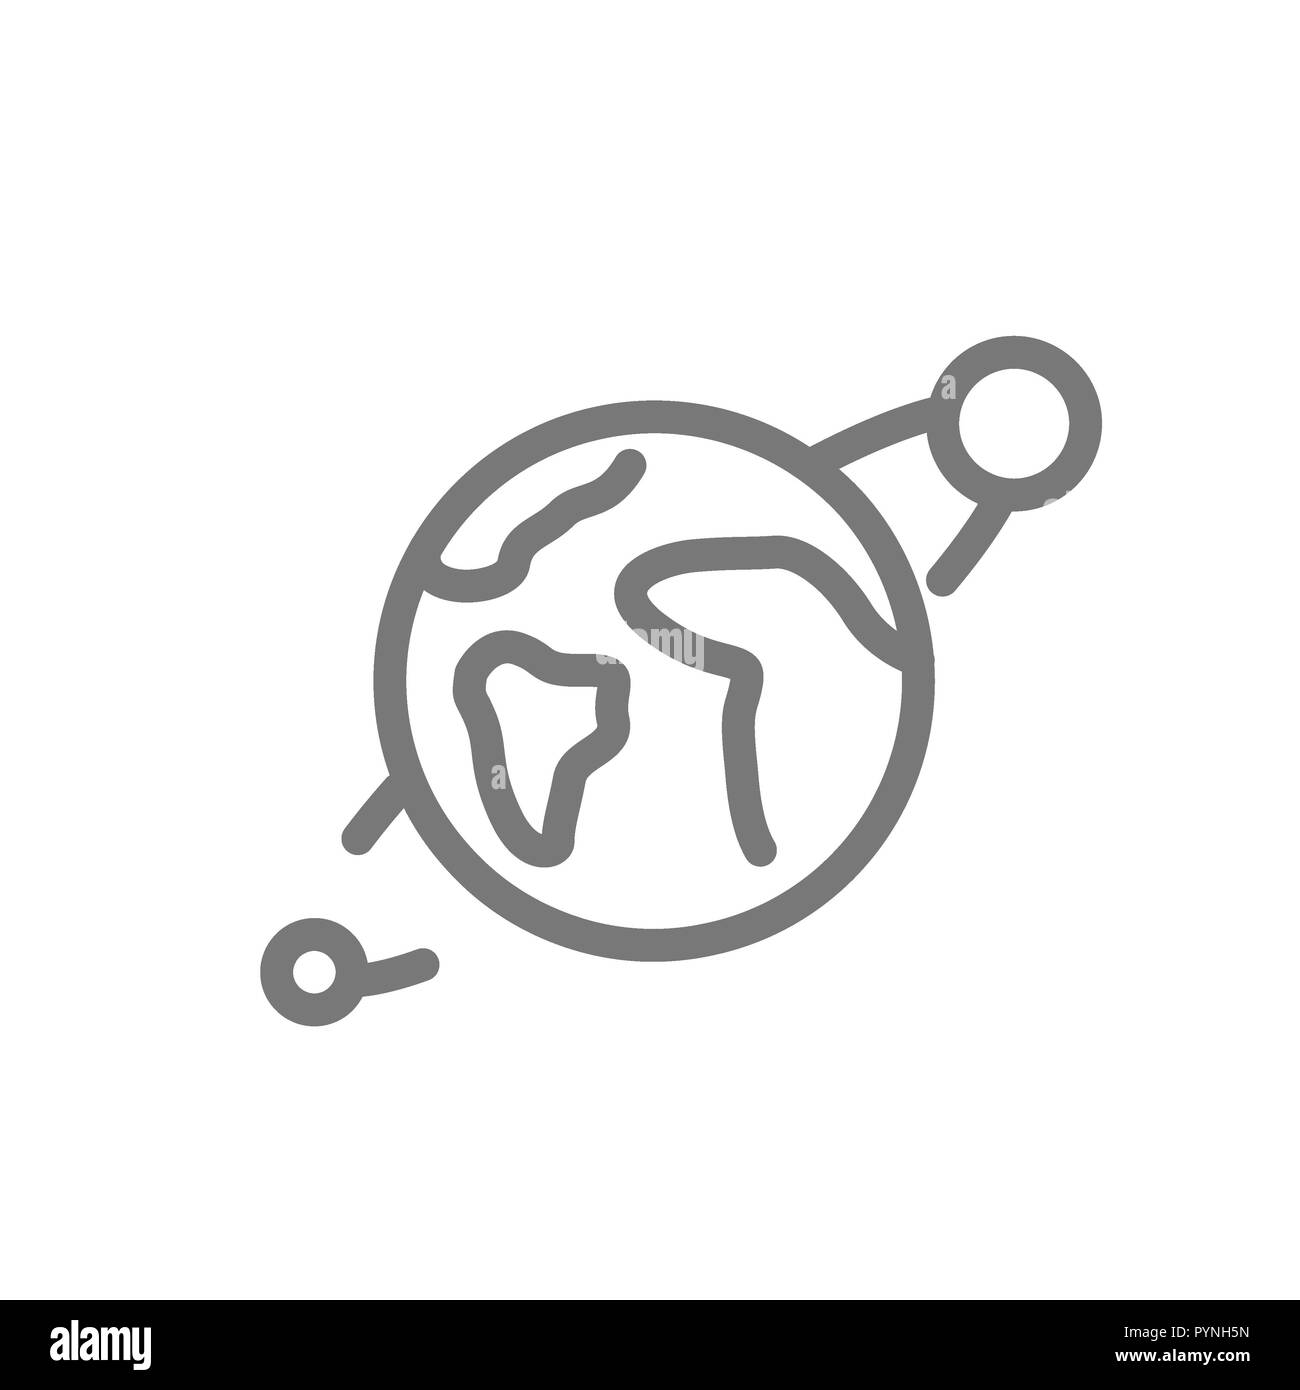 Simple planet line icon. Symbol and sign illustration design. Isolated on white background Stock Photo